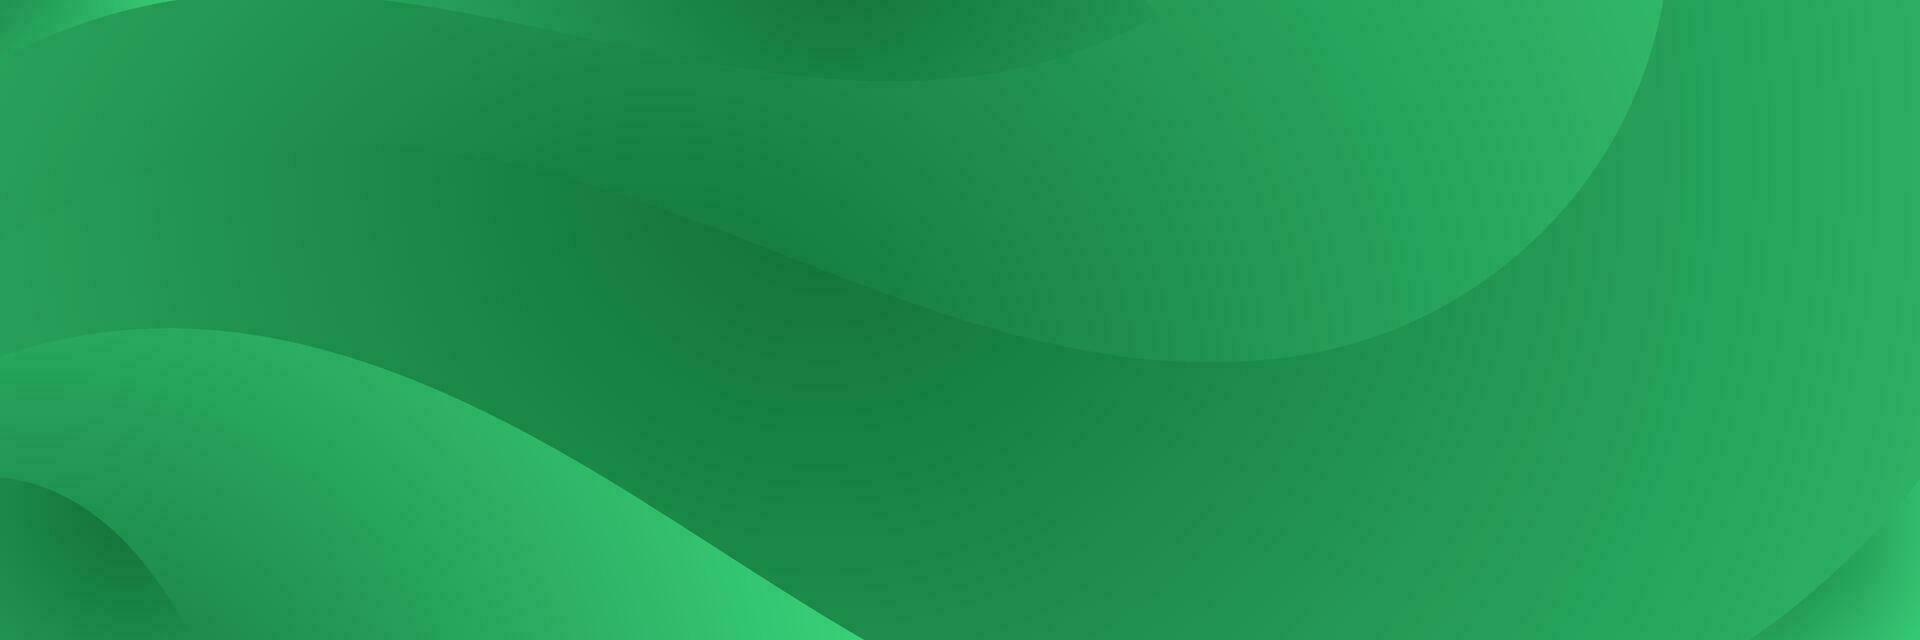 abstract green organic background vector